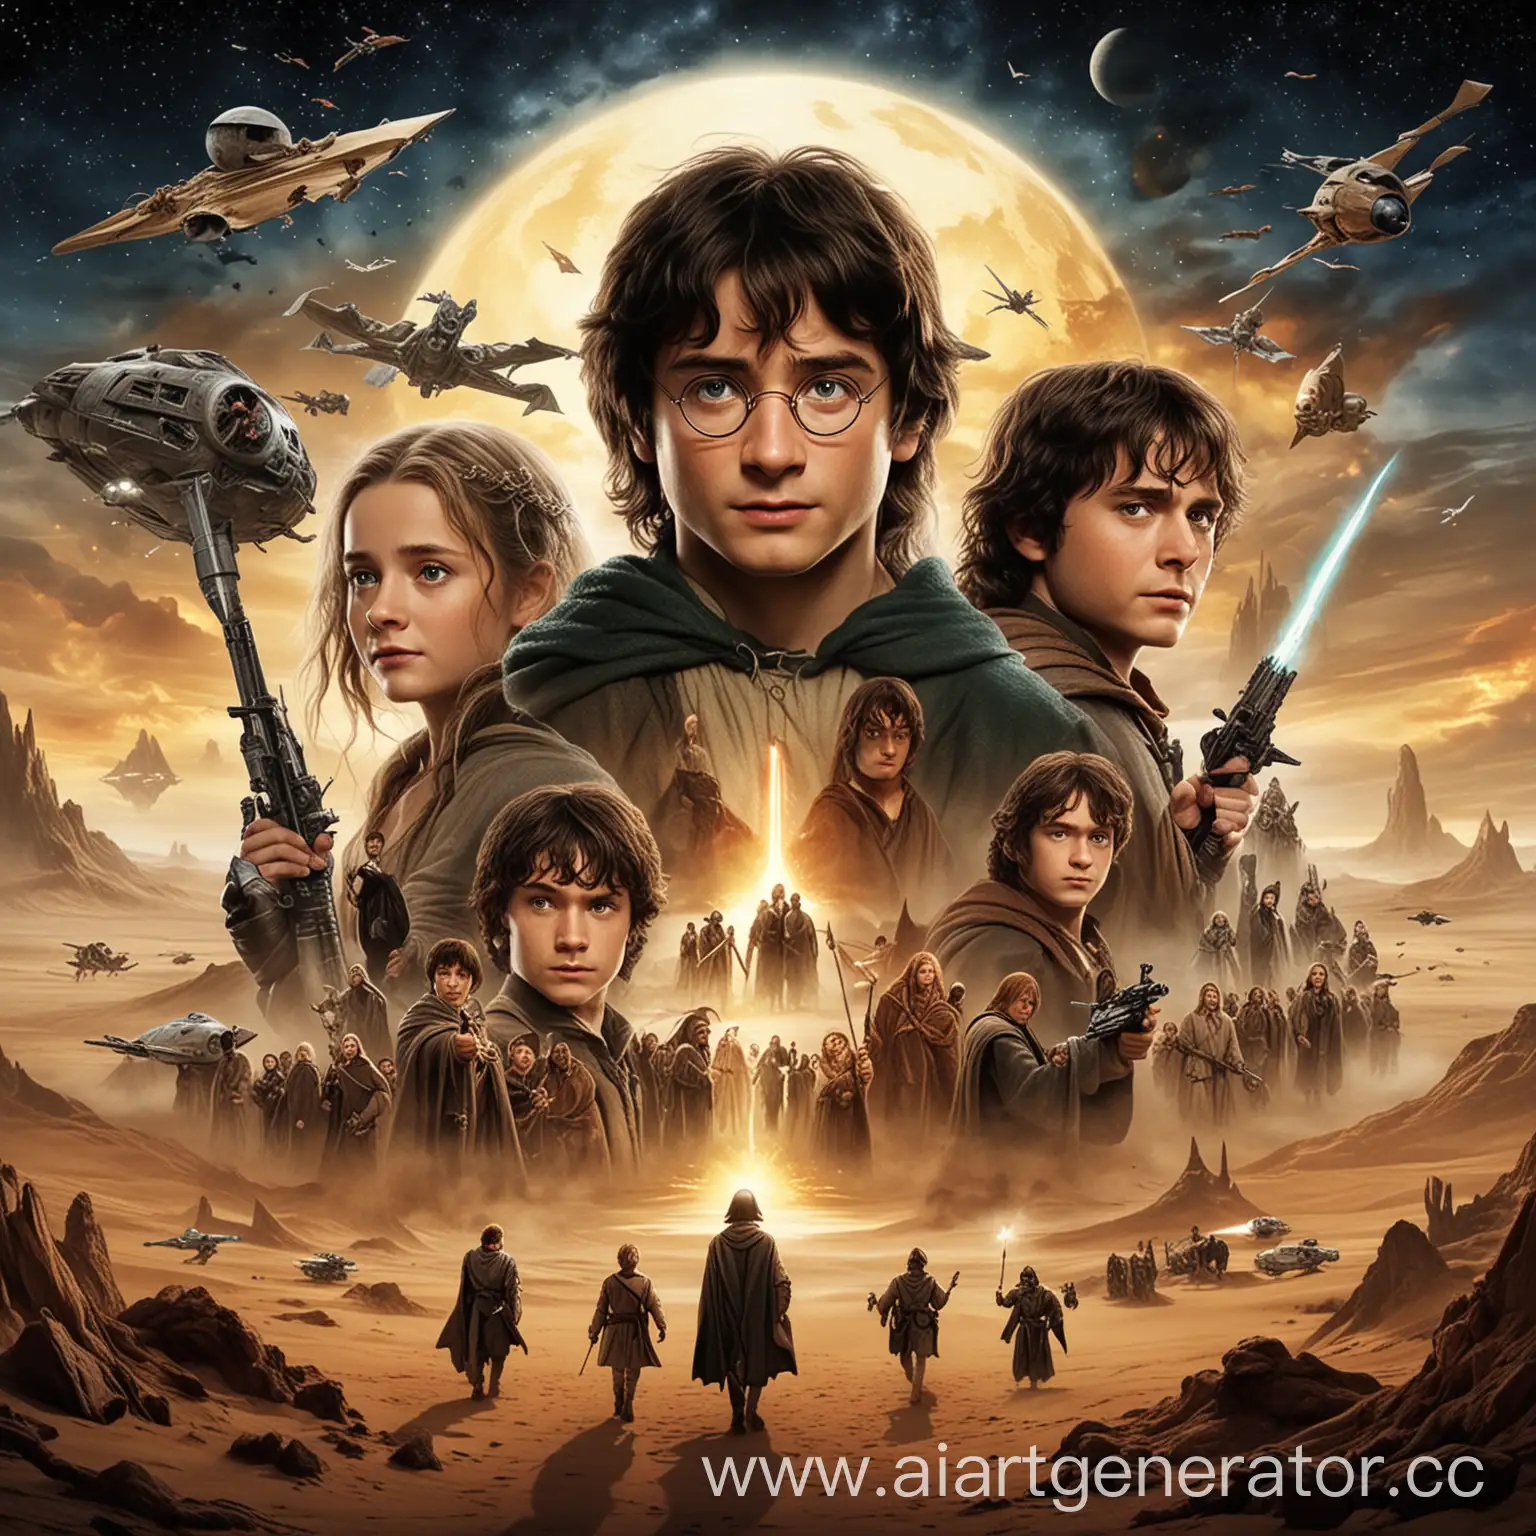 Epic-Mashup-Star-Wars-Harry-Potter-and-Lord-of-the-Rings-Universe-Collide-with-Dune-Worms-and-Spaceships